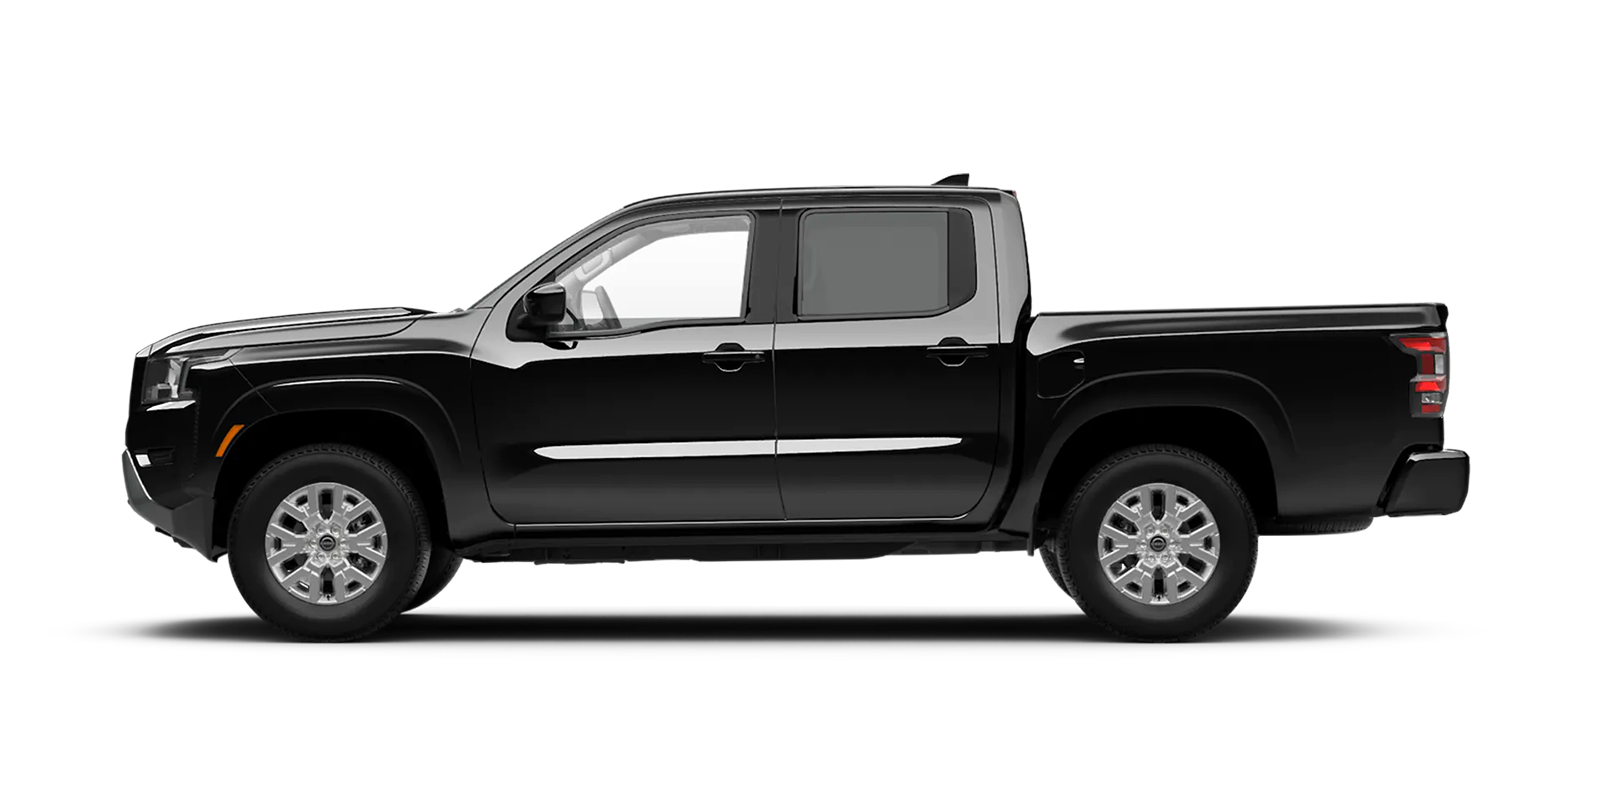 2022 Frontier Crew Cab SV 4x4 in Super Black | Mountain View Nissan Of Cleveland in McDonald TN